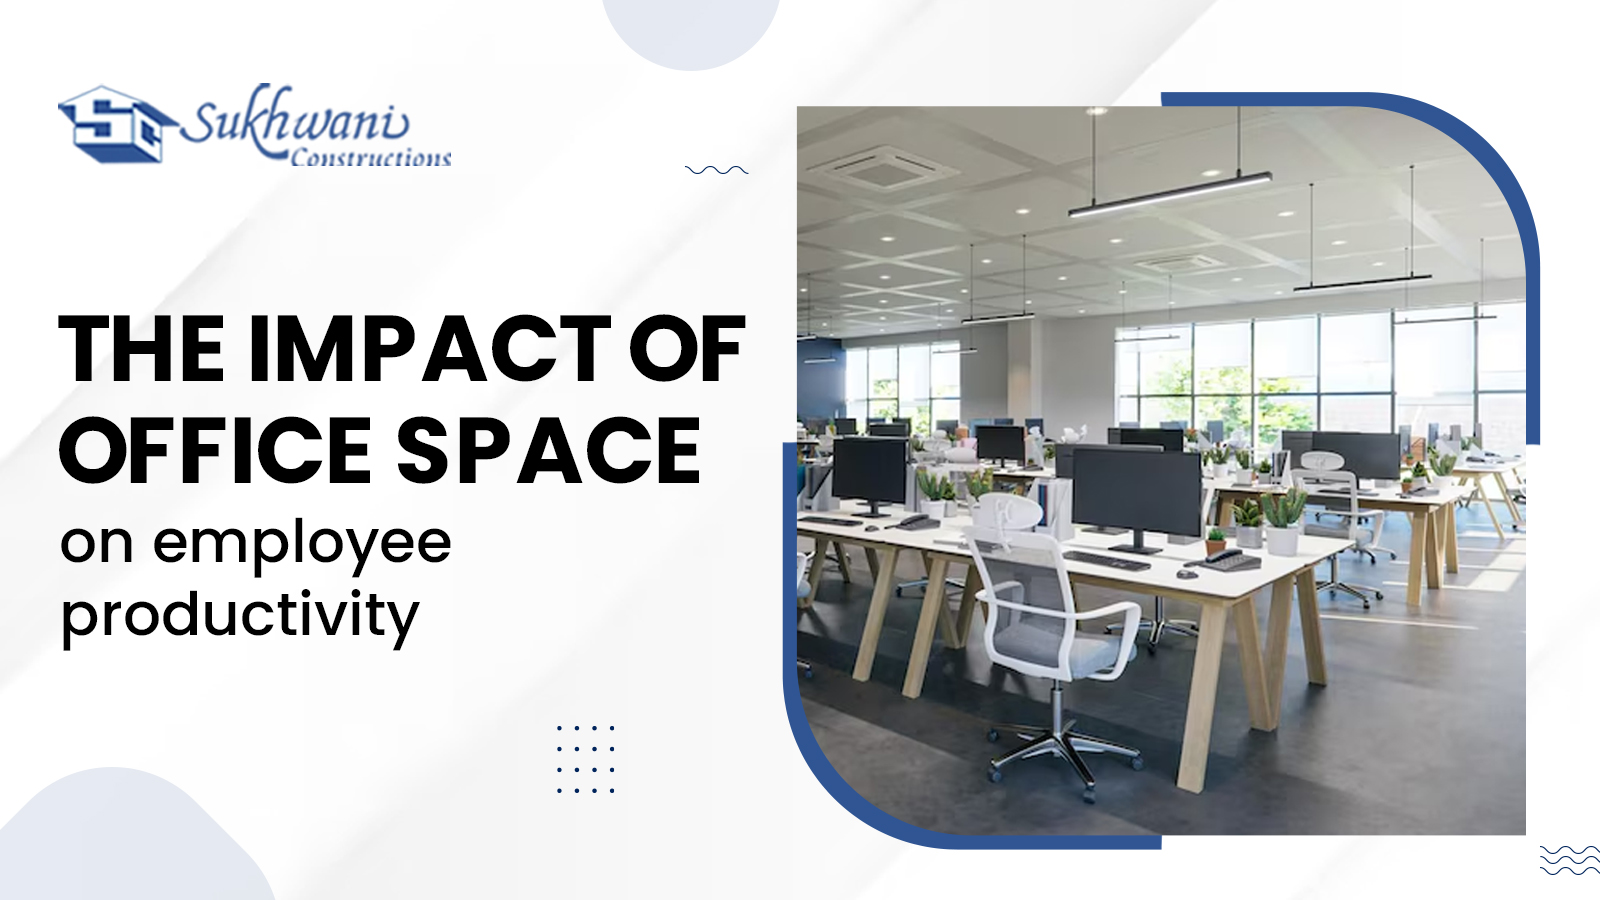 The impact of office space on employee productivity